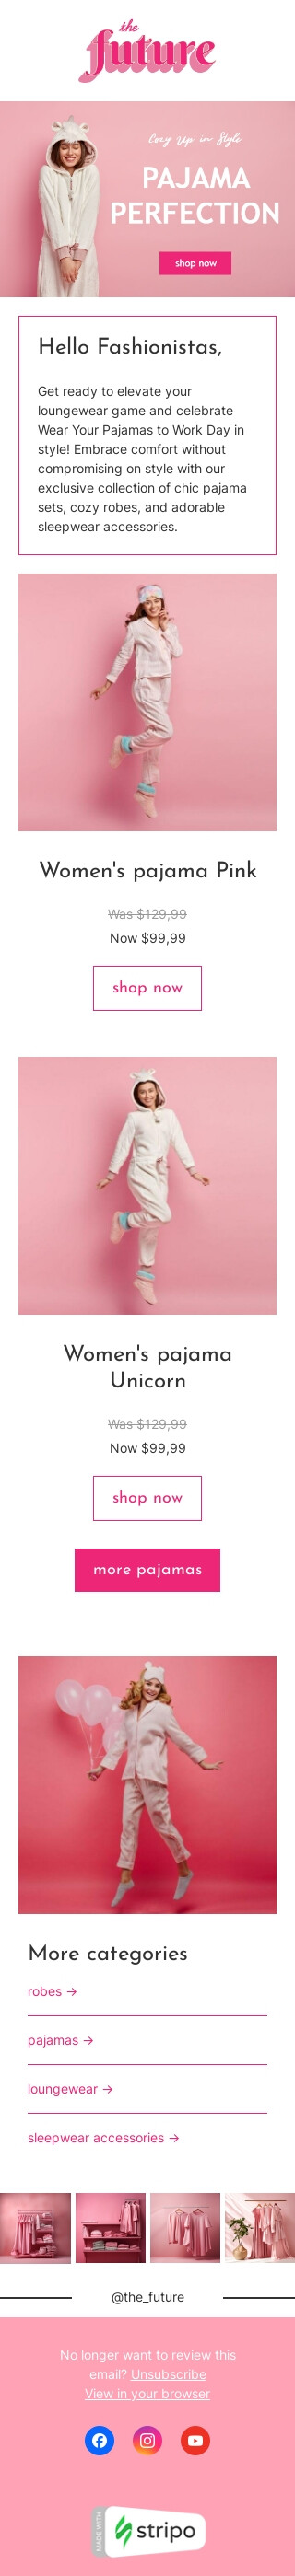 Wear Your Pajamas to Work Day email template "Pajama sets" for fashion industry mobile view